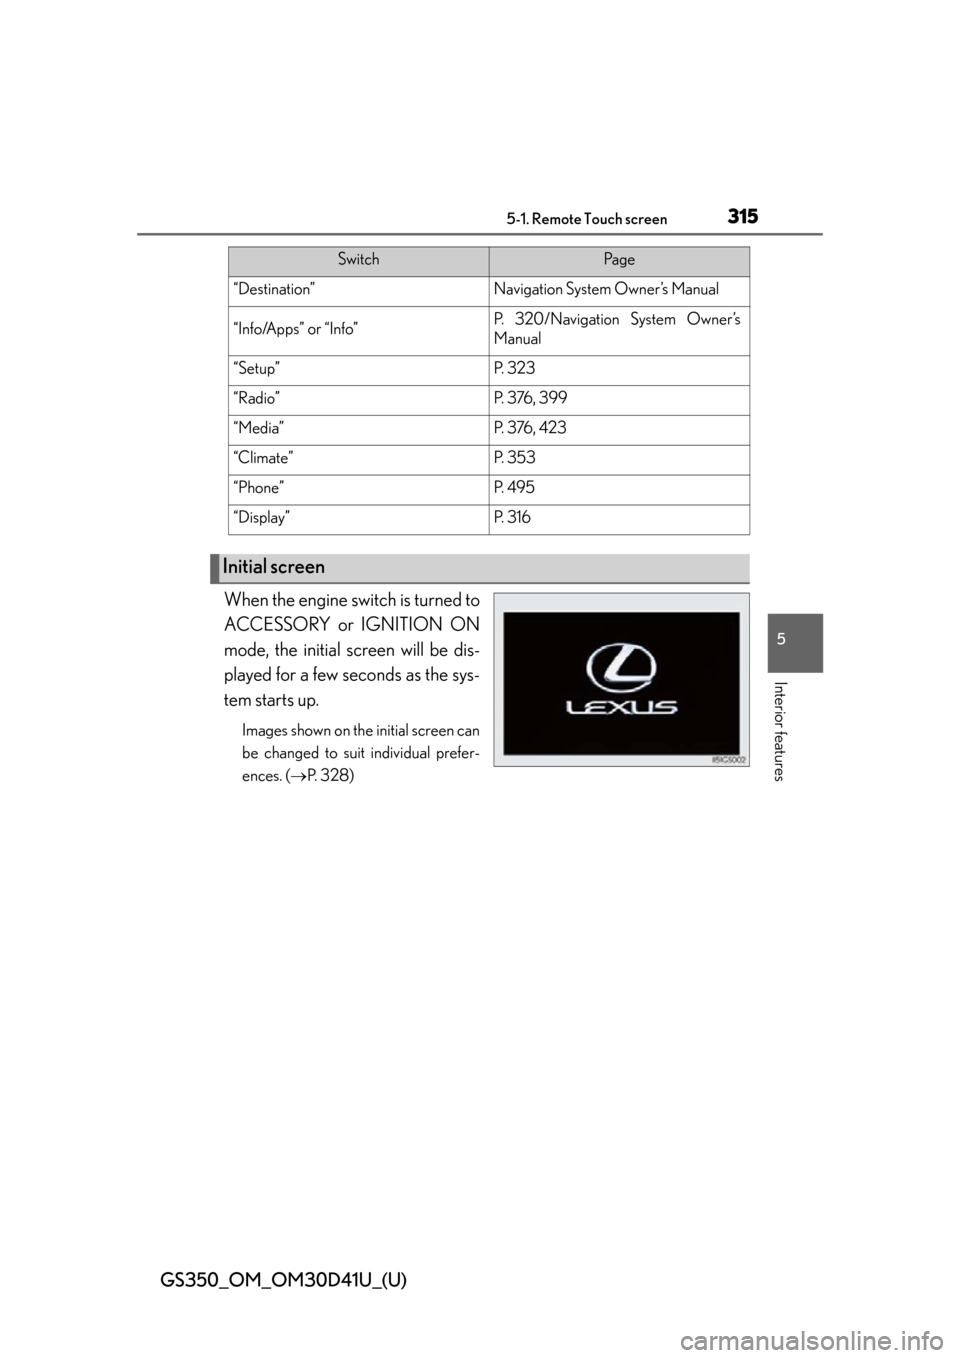 Lexus GS350 2014  Using the air conditioning system and defogger / LEXUS 2014 GS350 OWNERS MANUAL (OM30D41U) GS350_OM_OM30D41U_(U)
3155-1. Remote Touch screen
5
Interior features
When the engine switch is turned to
ACCESSORY or IGNITION ON
mode, the initial screen will be dis-
played for a few seconds as the